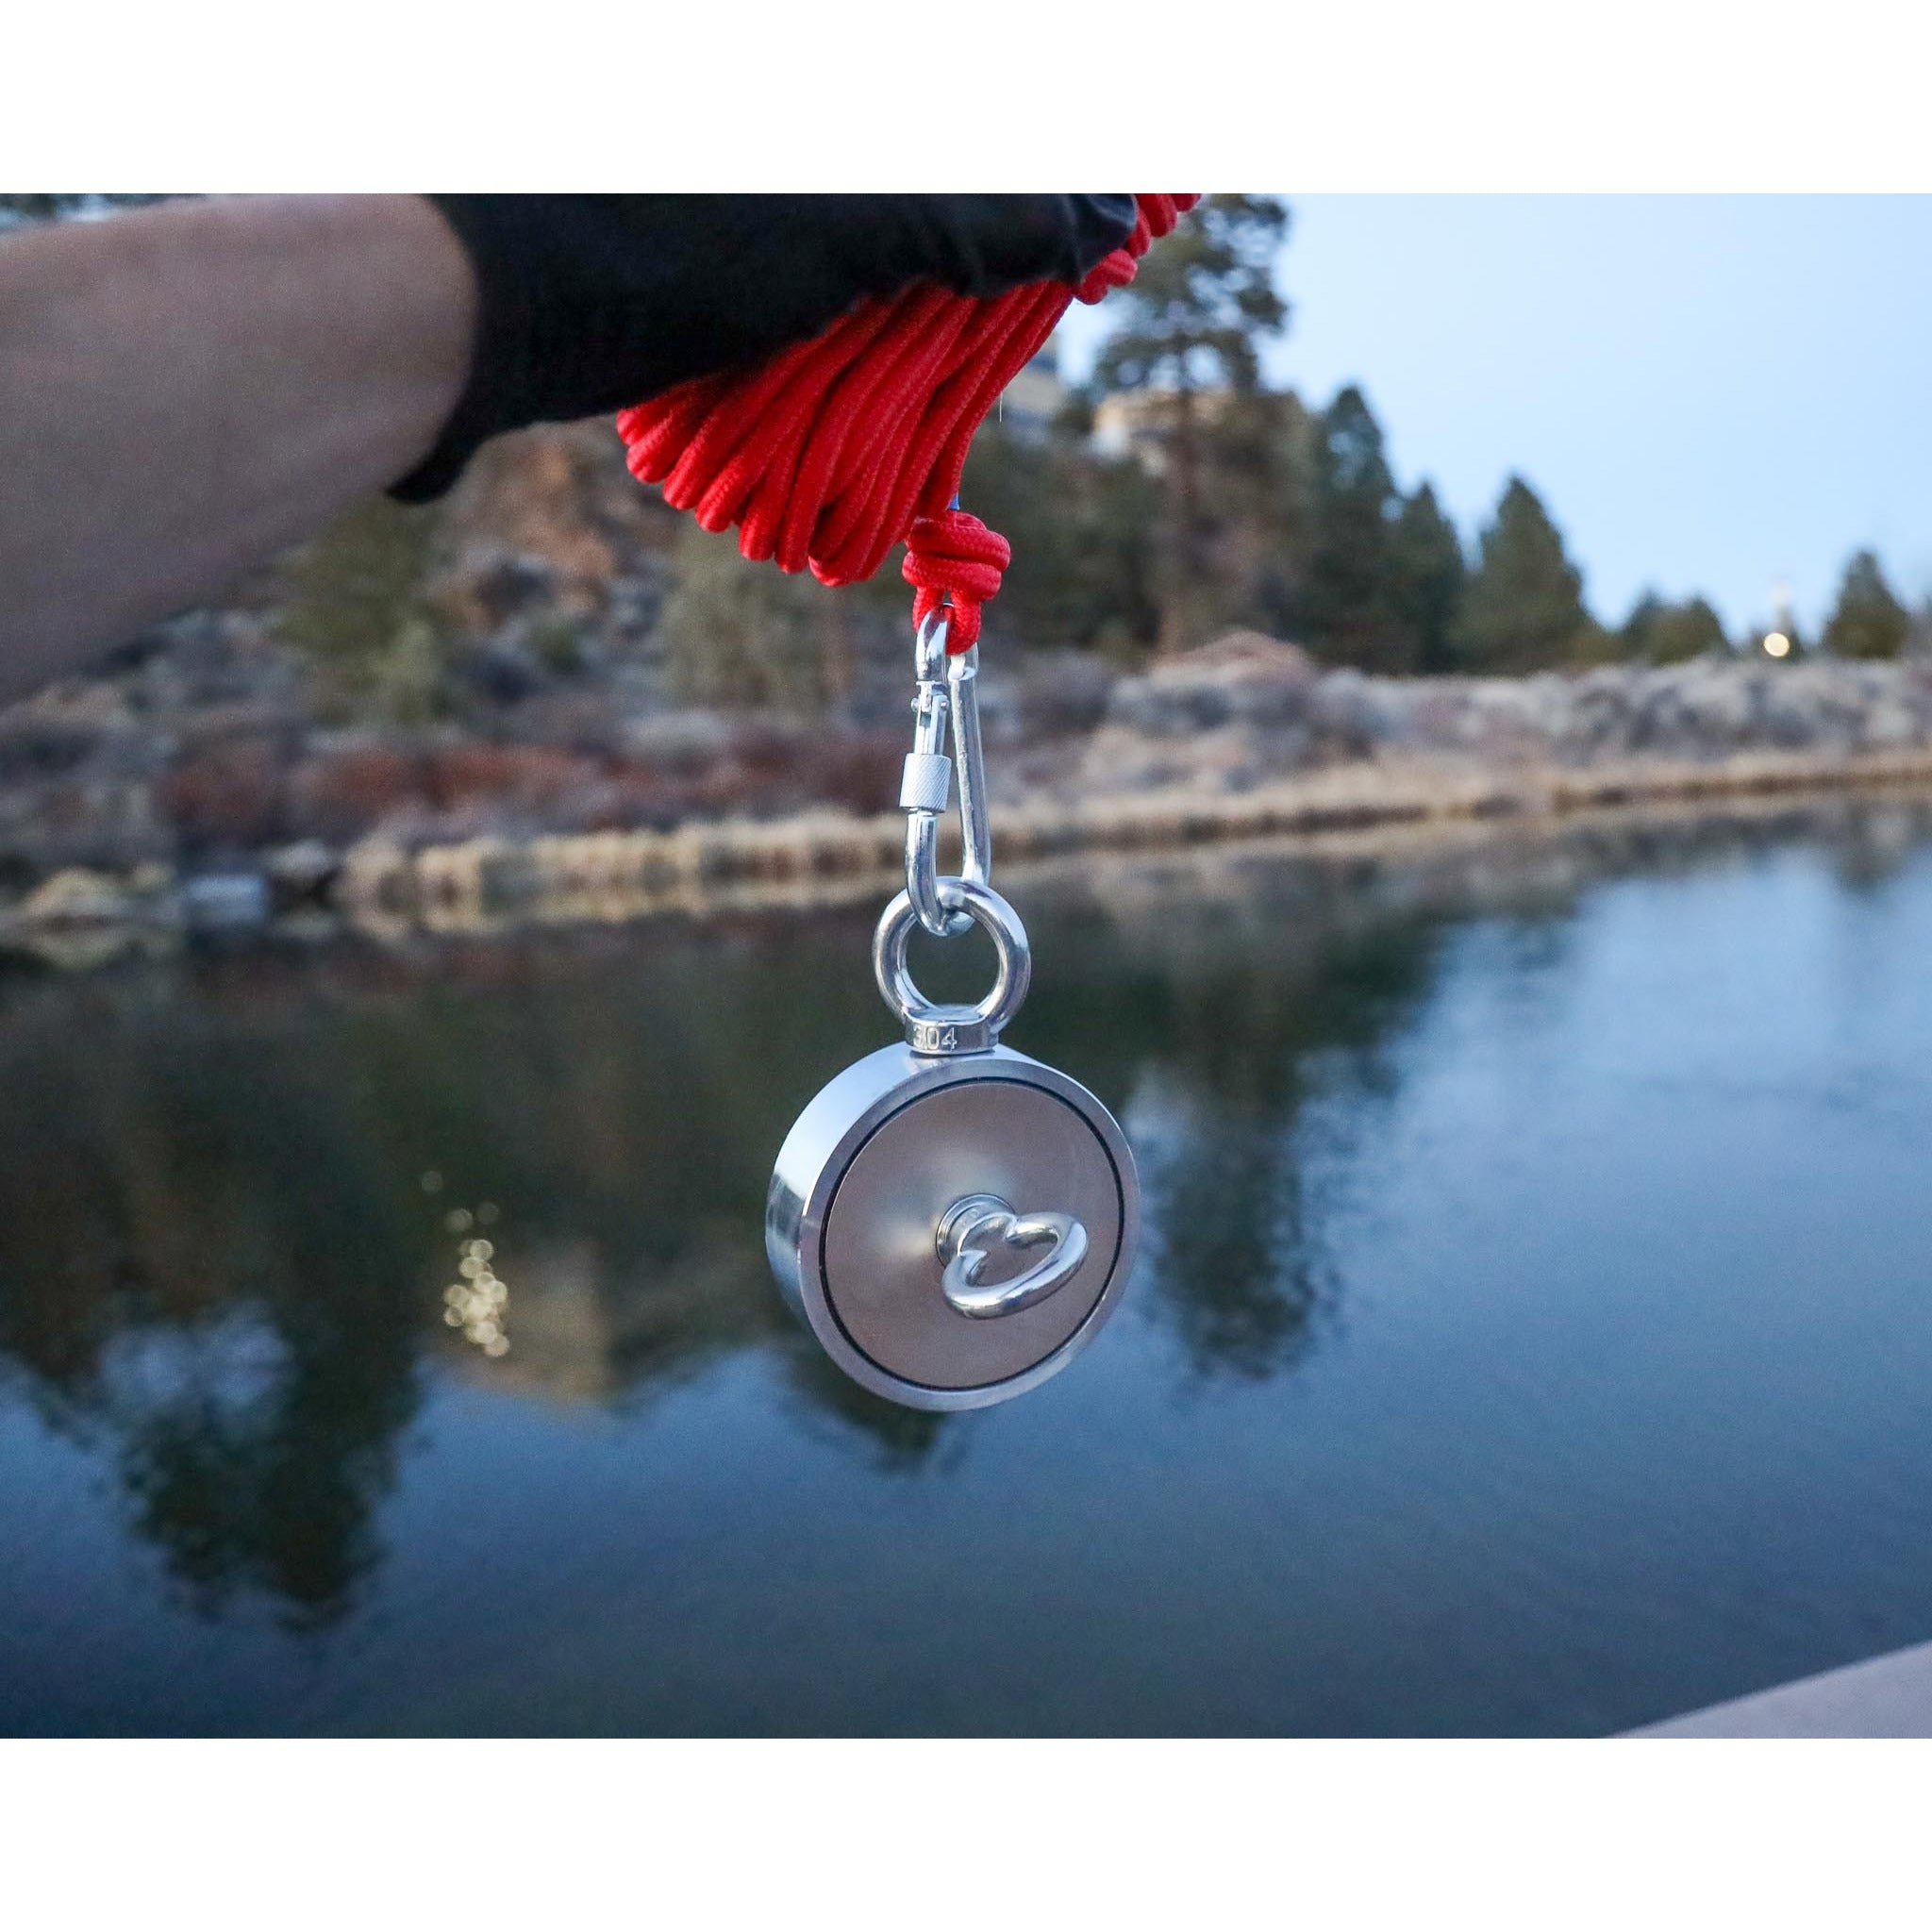 2,600 LBS 2-In-1 PULL FISHING MAGNET